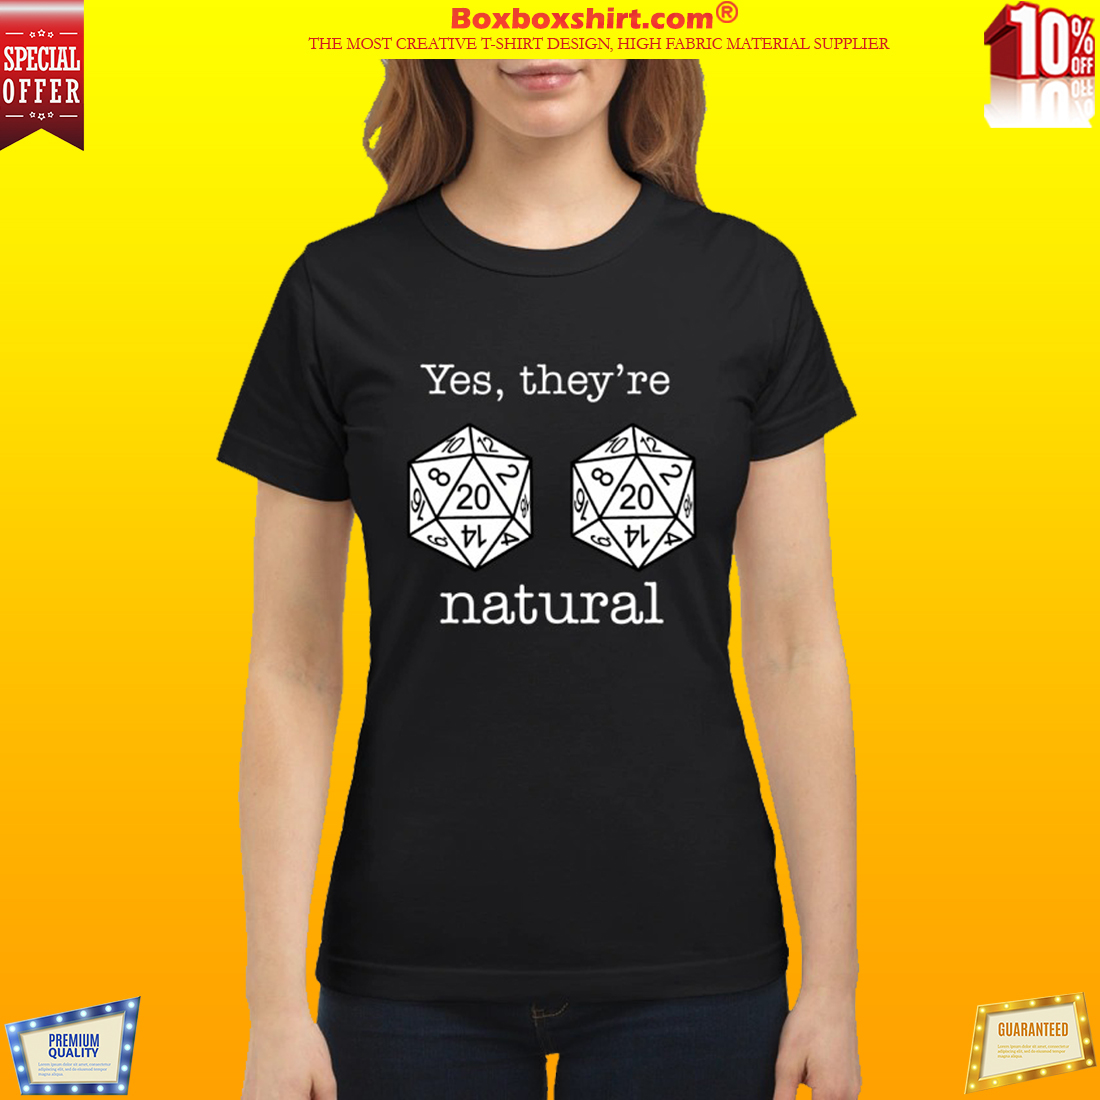 Dnd 20 dice yes they're natural t classic shirt